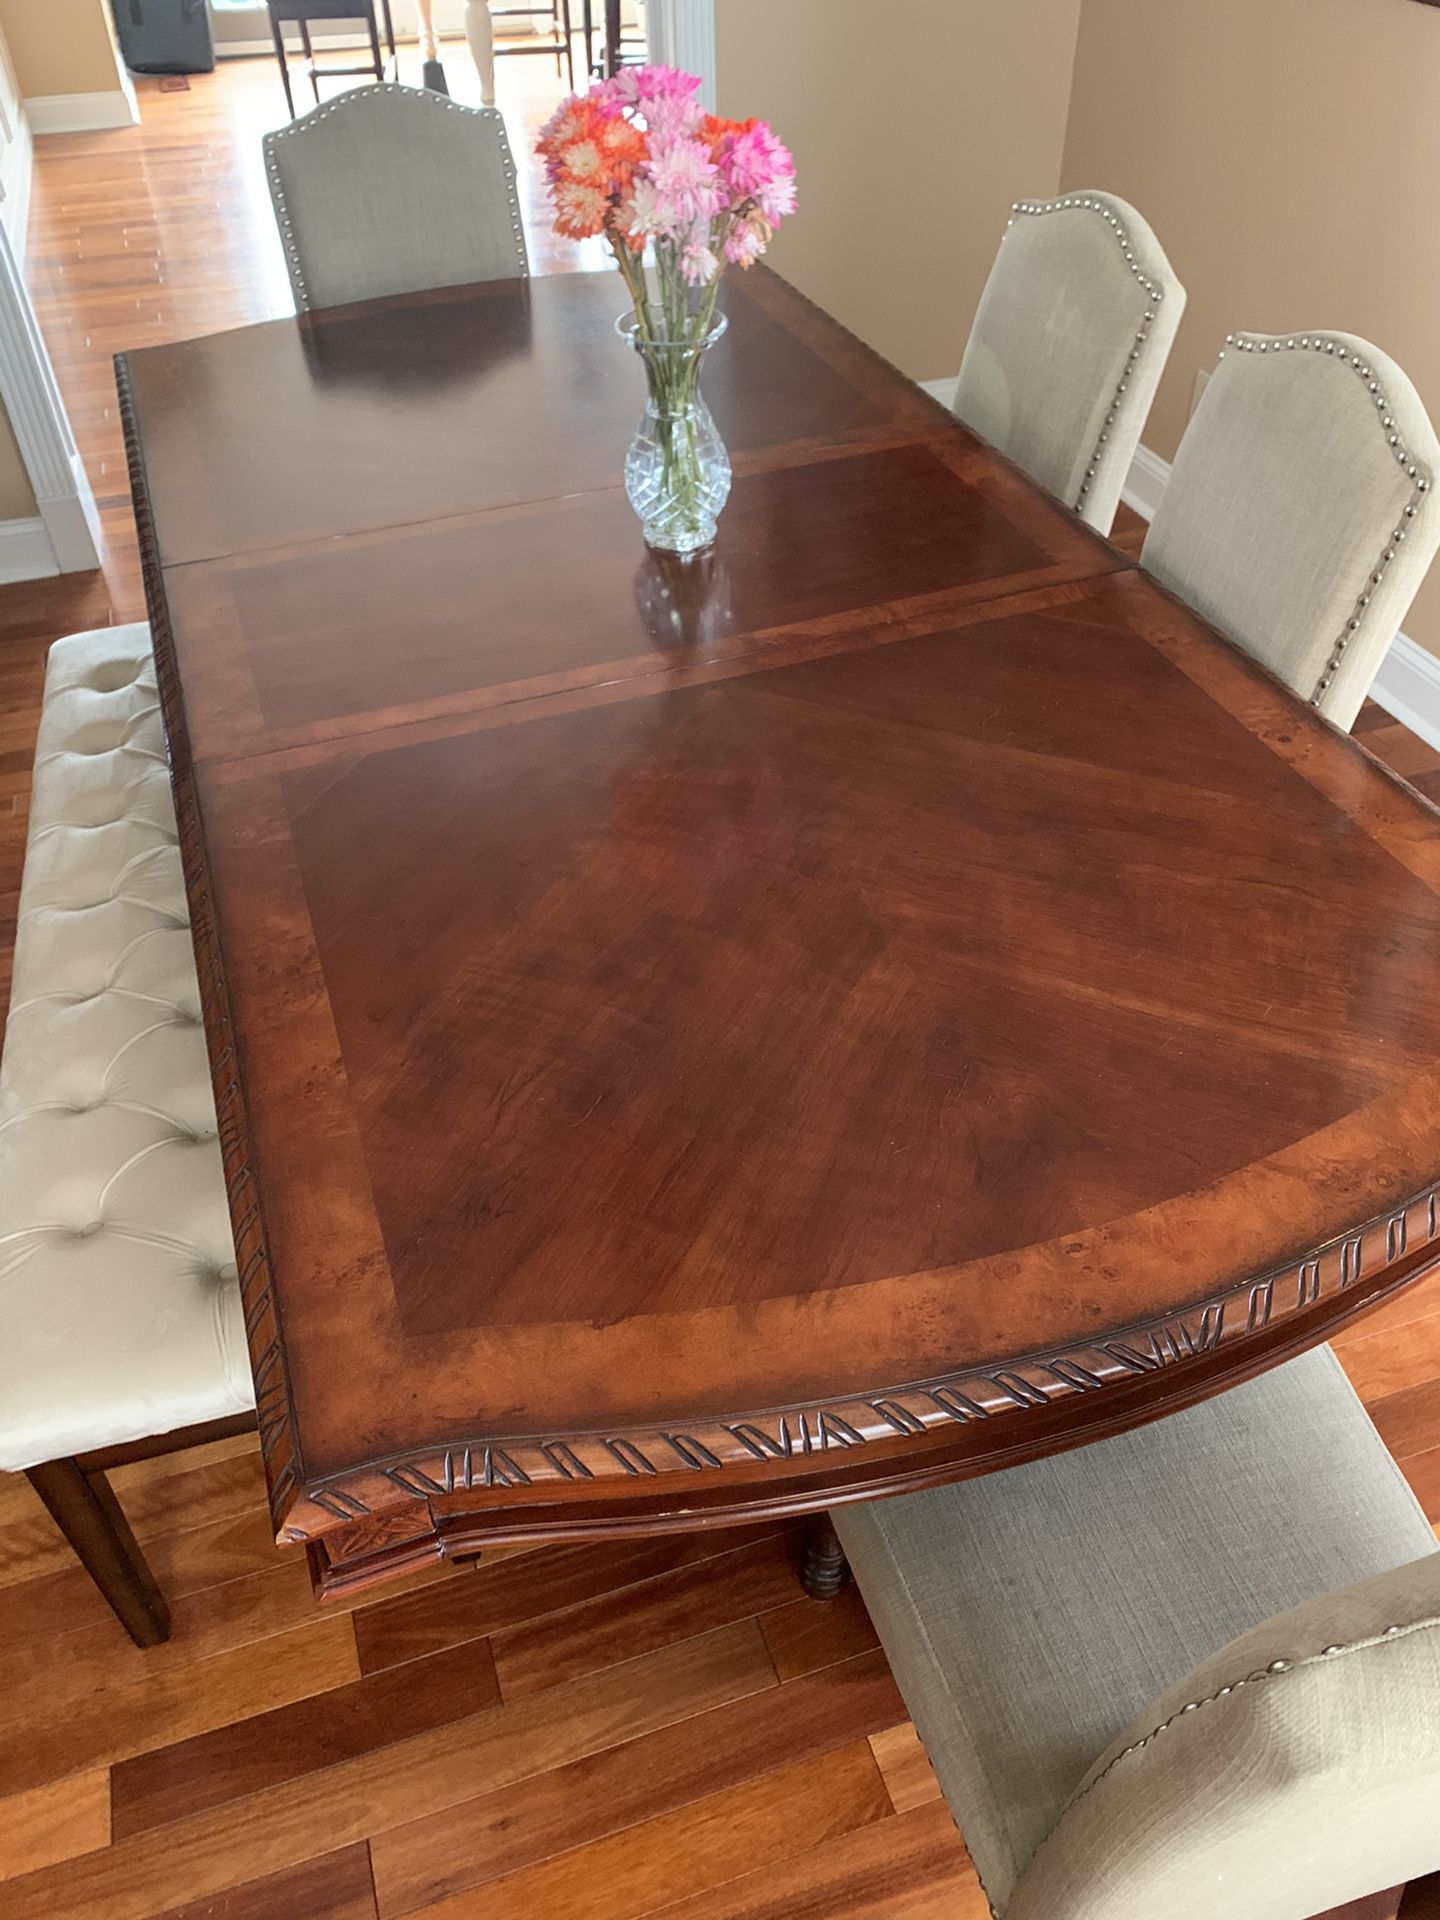 Dining room table - has 2 leafs to extend the table from 6 feet long to 9 feet long